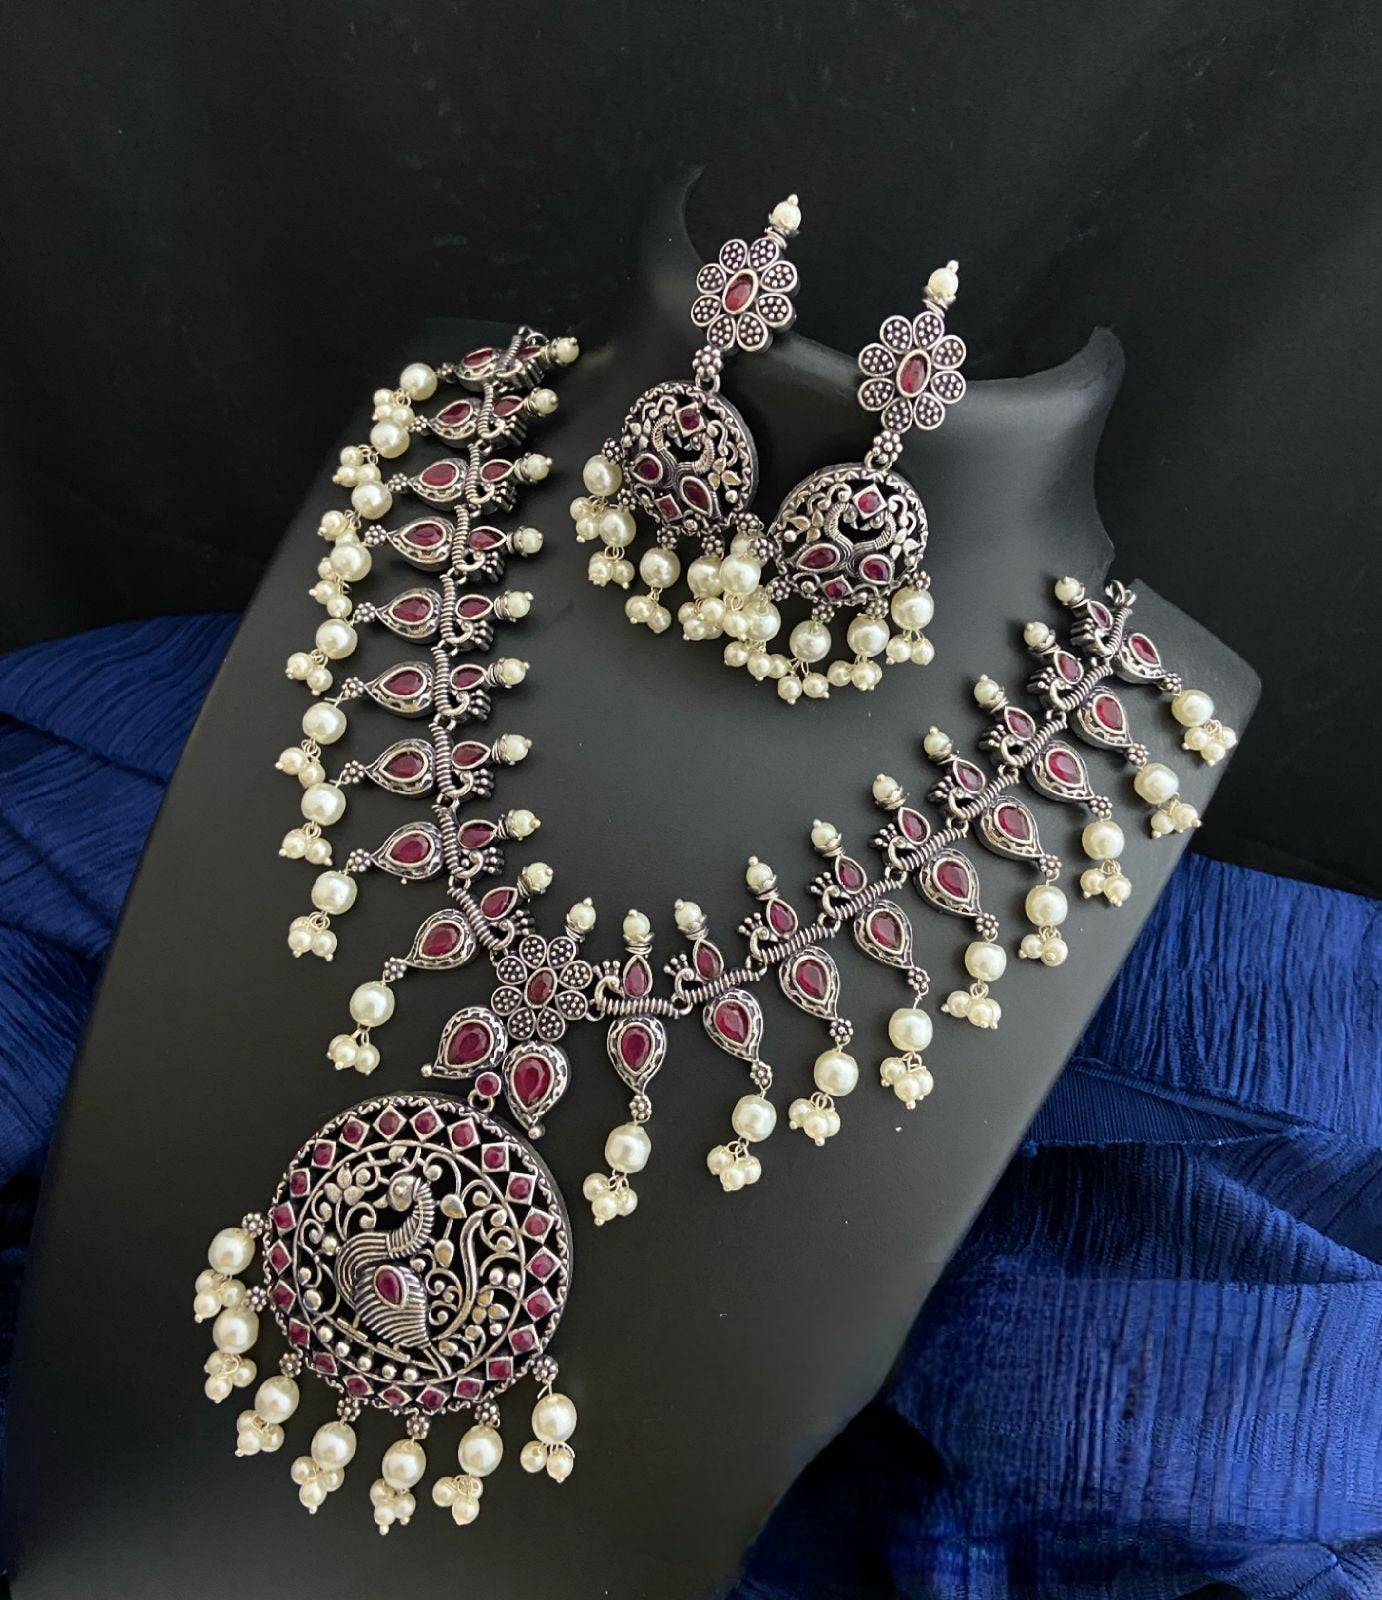 Trendy Indian Oxidized Necklace earring set with color stones | Antique look Bollywood Style German Silver Peacock Design Temple jewelry set